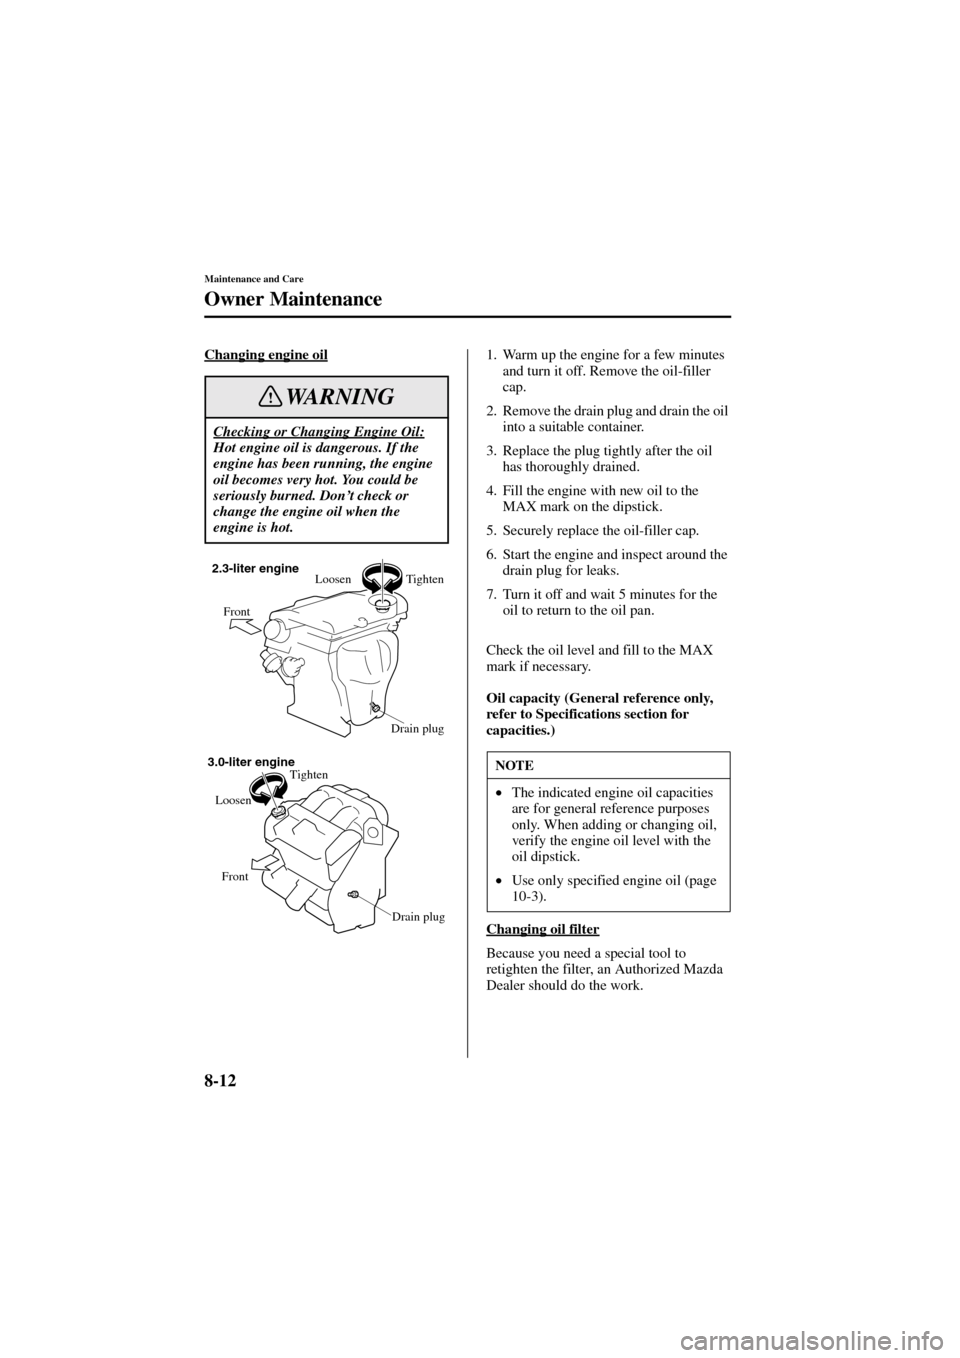 MAZDA MODEL 6 2004  Owners Manual (in English) 8-12
Maintenance and Care
Owner Maintenance
Form No. 8R29-EA-02I
Changing engine oil1. Warm up the engine for a few minutes 
and turn it off. Remove the oil-filler 
cap.
2. Remove the drain plug and d